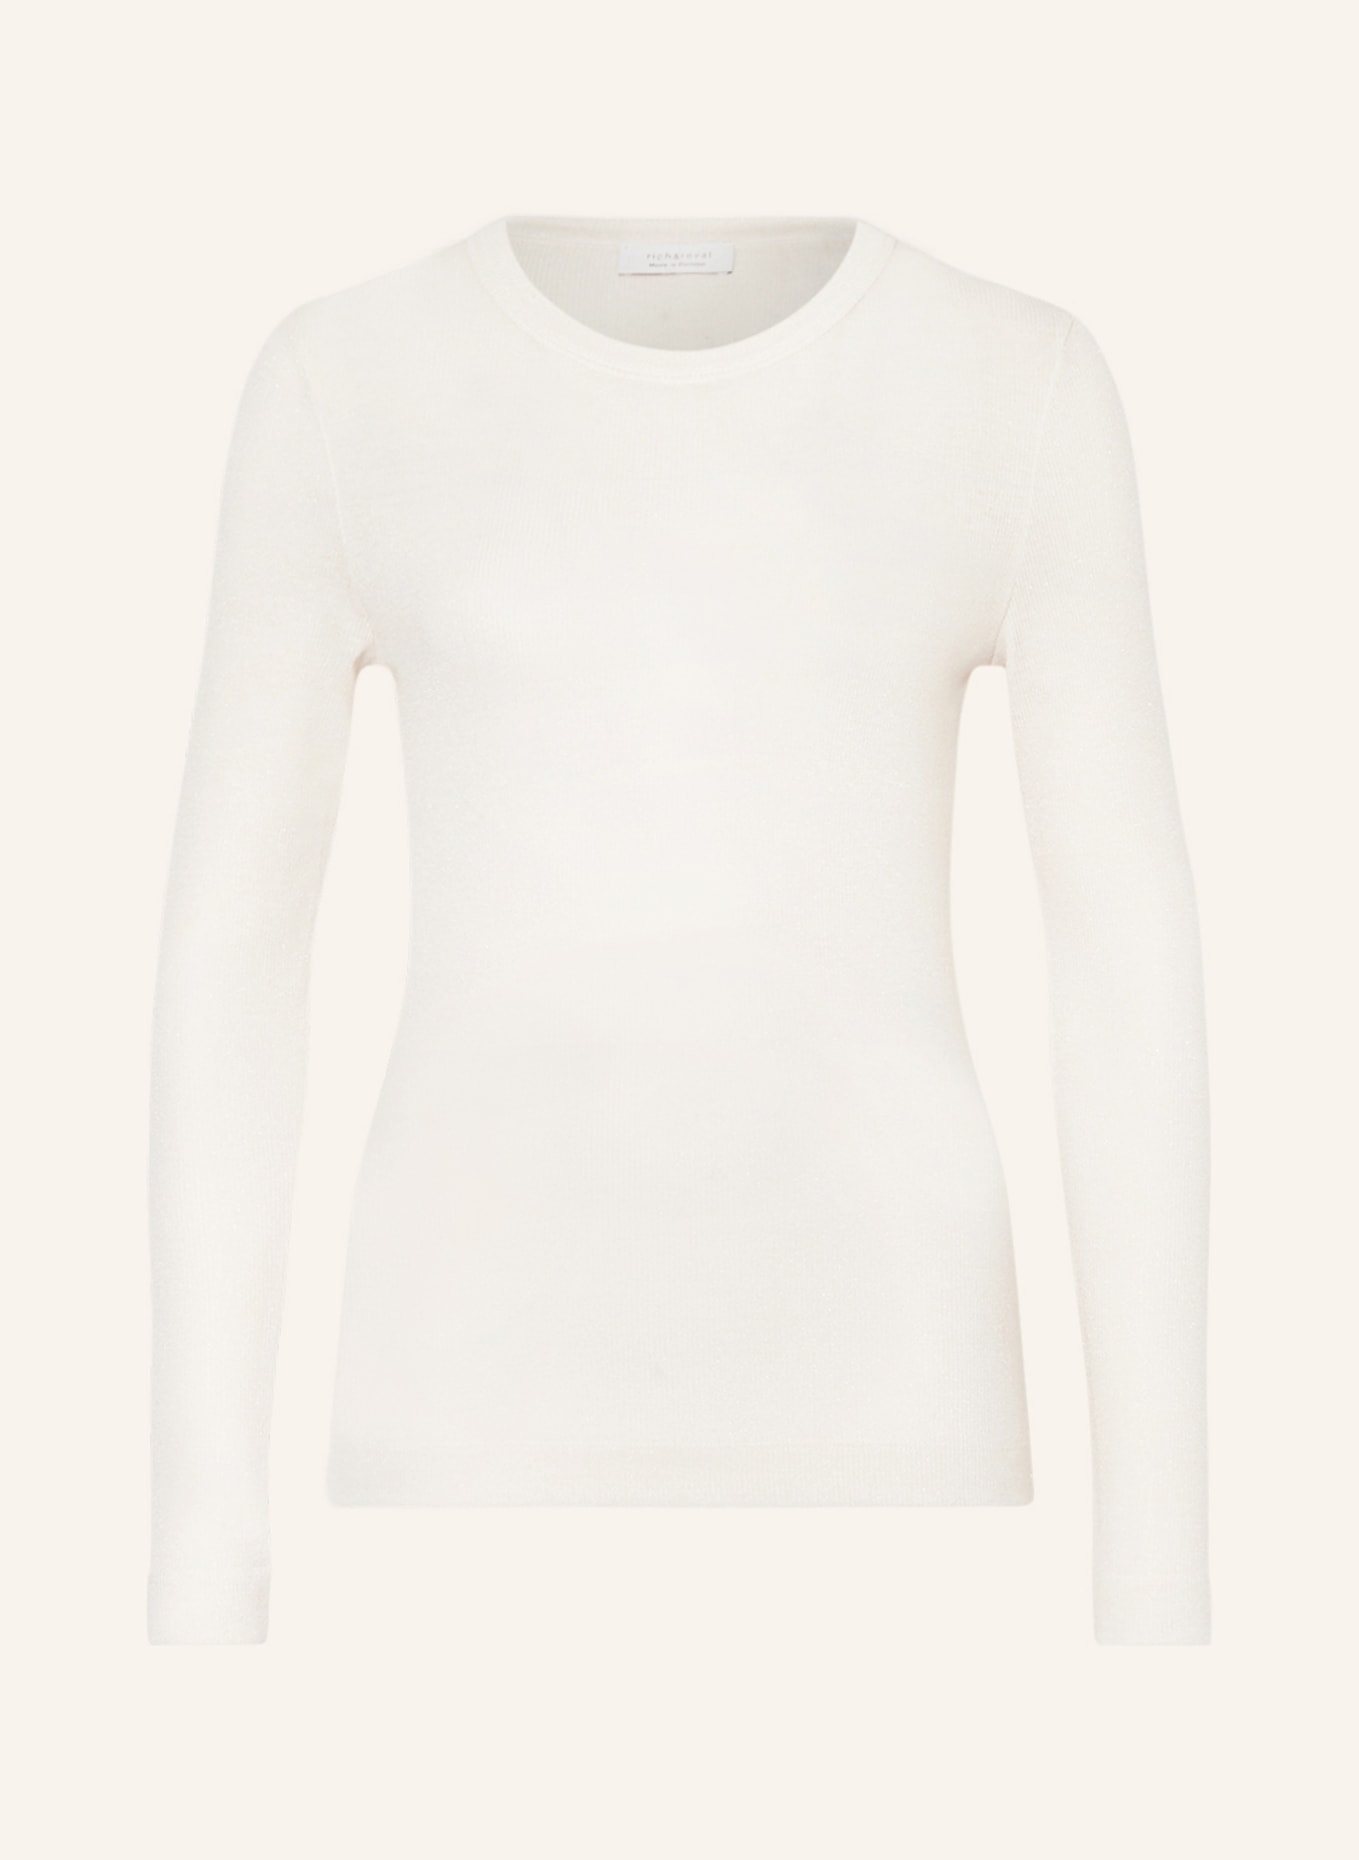 rich&royal Long sleeve shirt with glitter thread, Color: WHITE (Image 1)